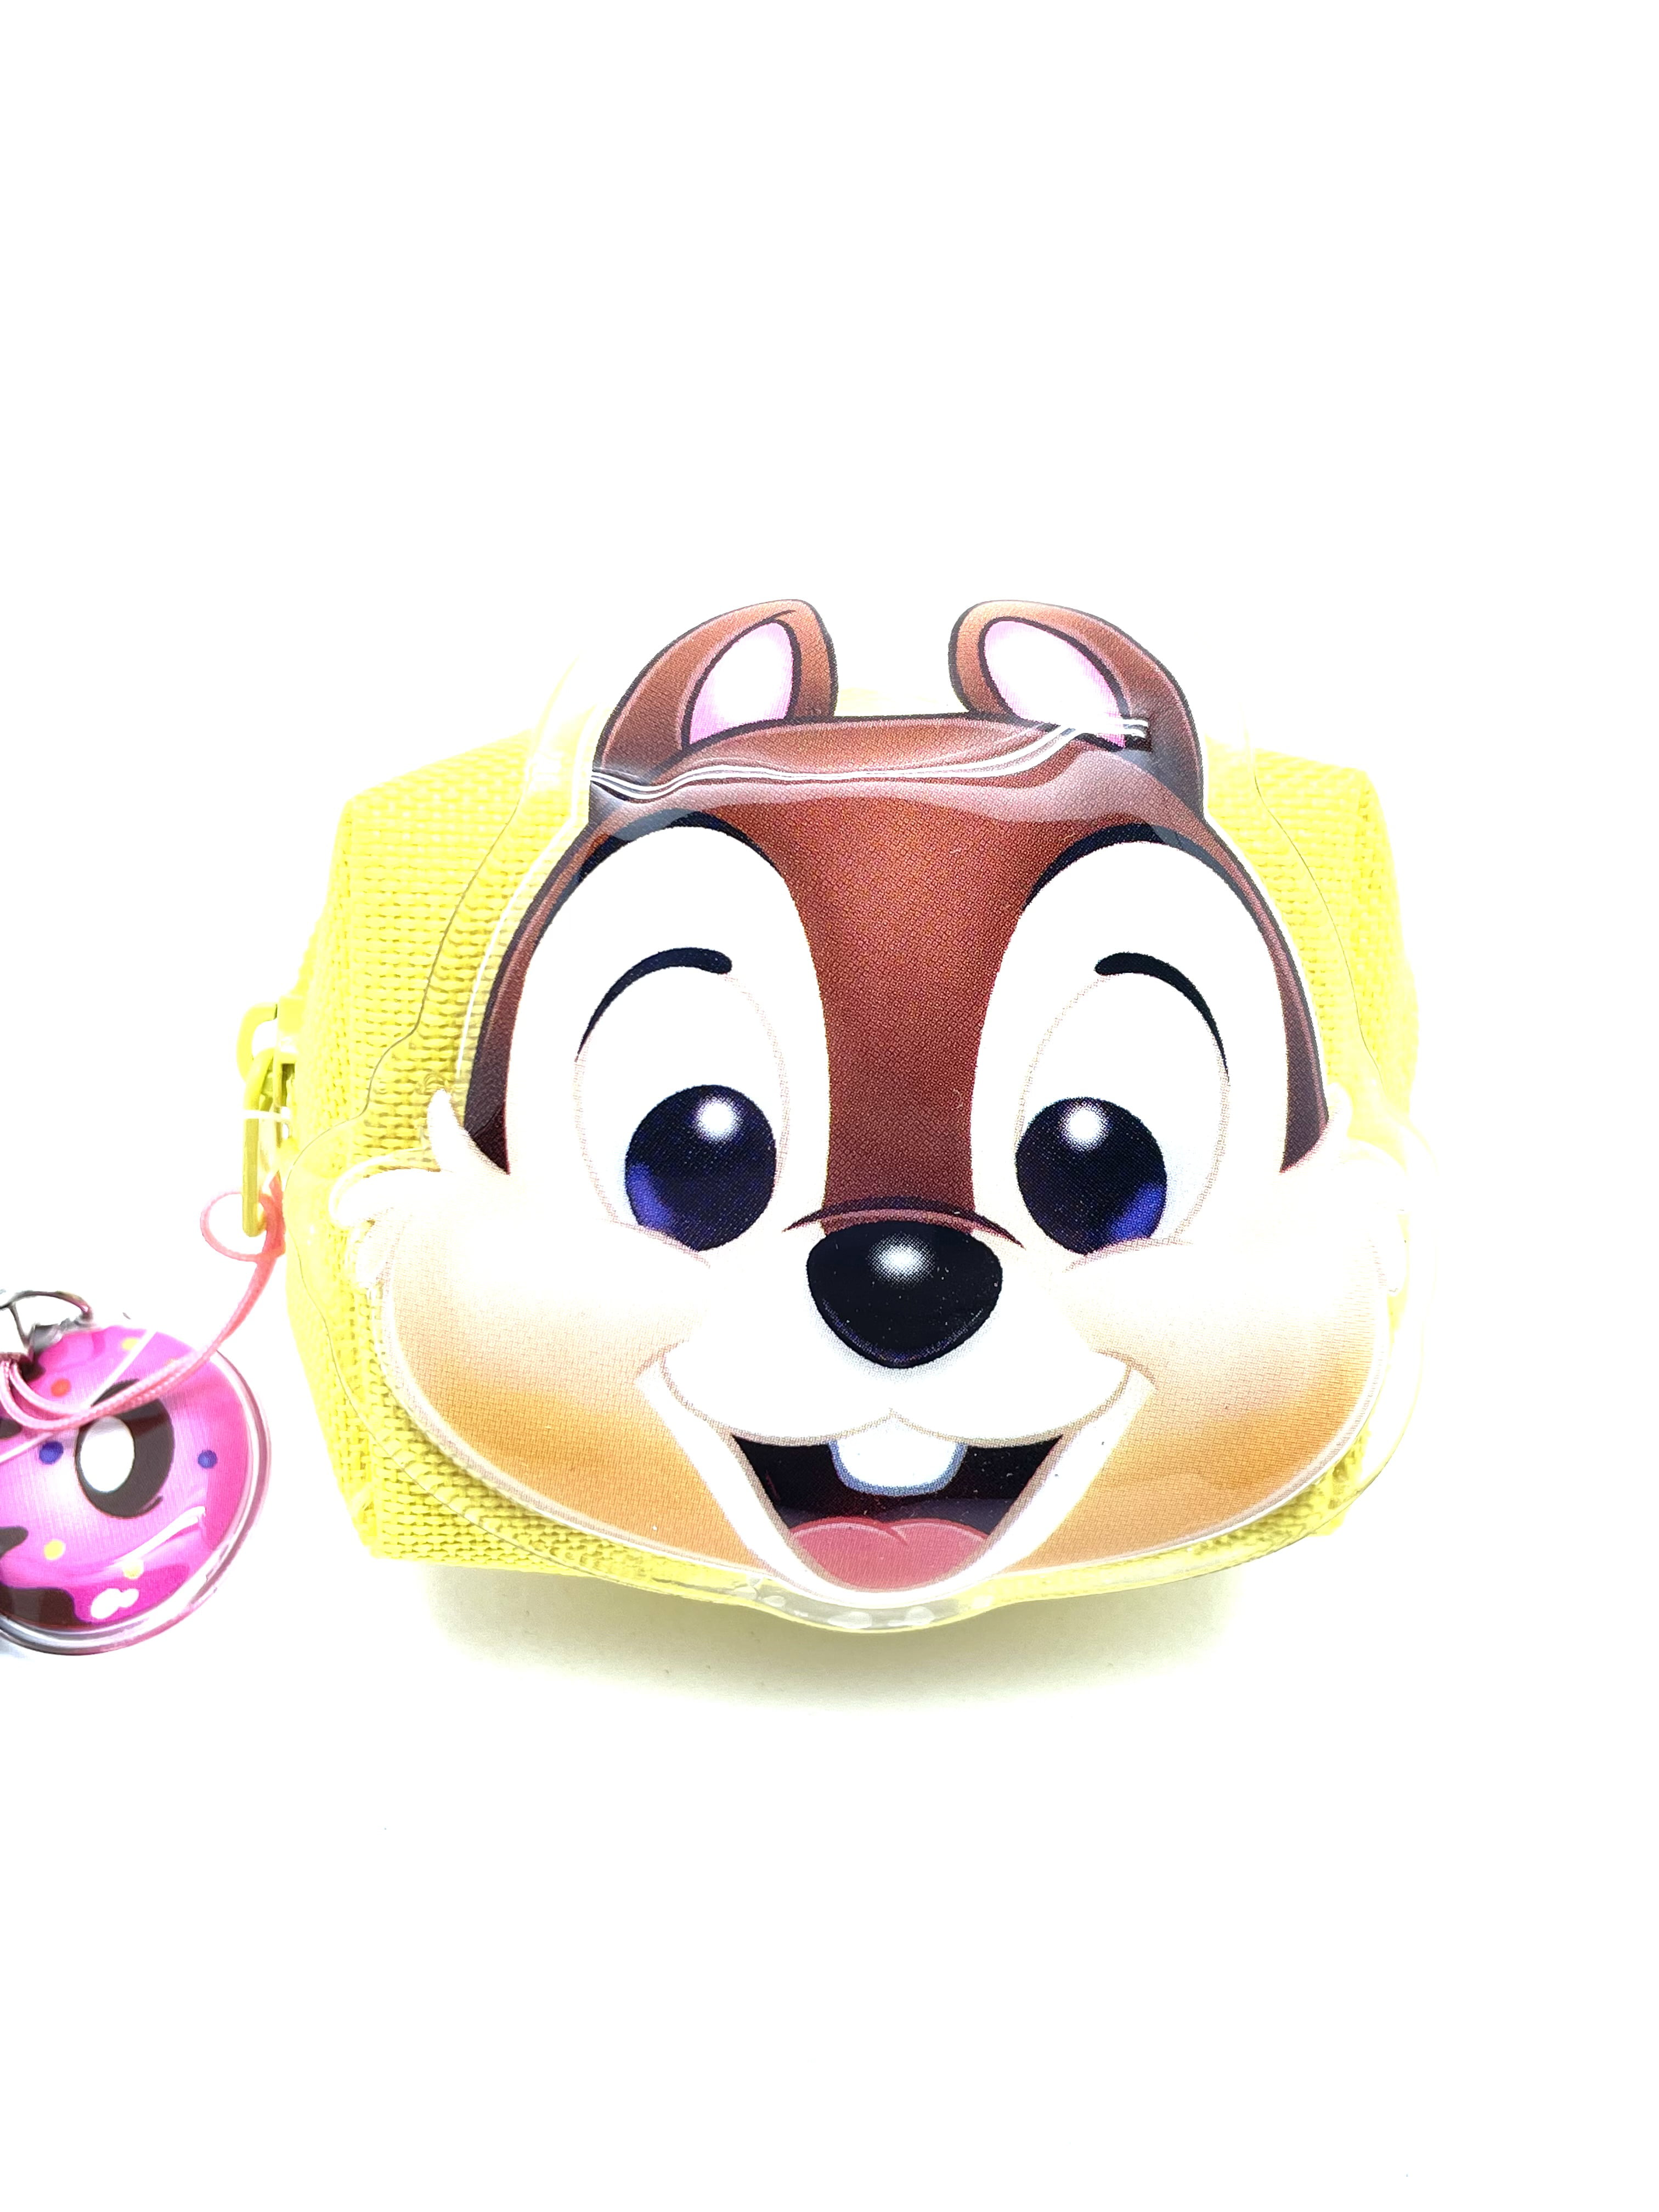 Coin Purse Chipmunk Fabric wallet change Purse with Zipper Wallet Coin Pouch Mini Size Cash Phone Holder